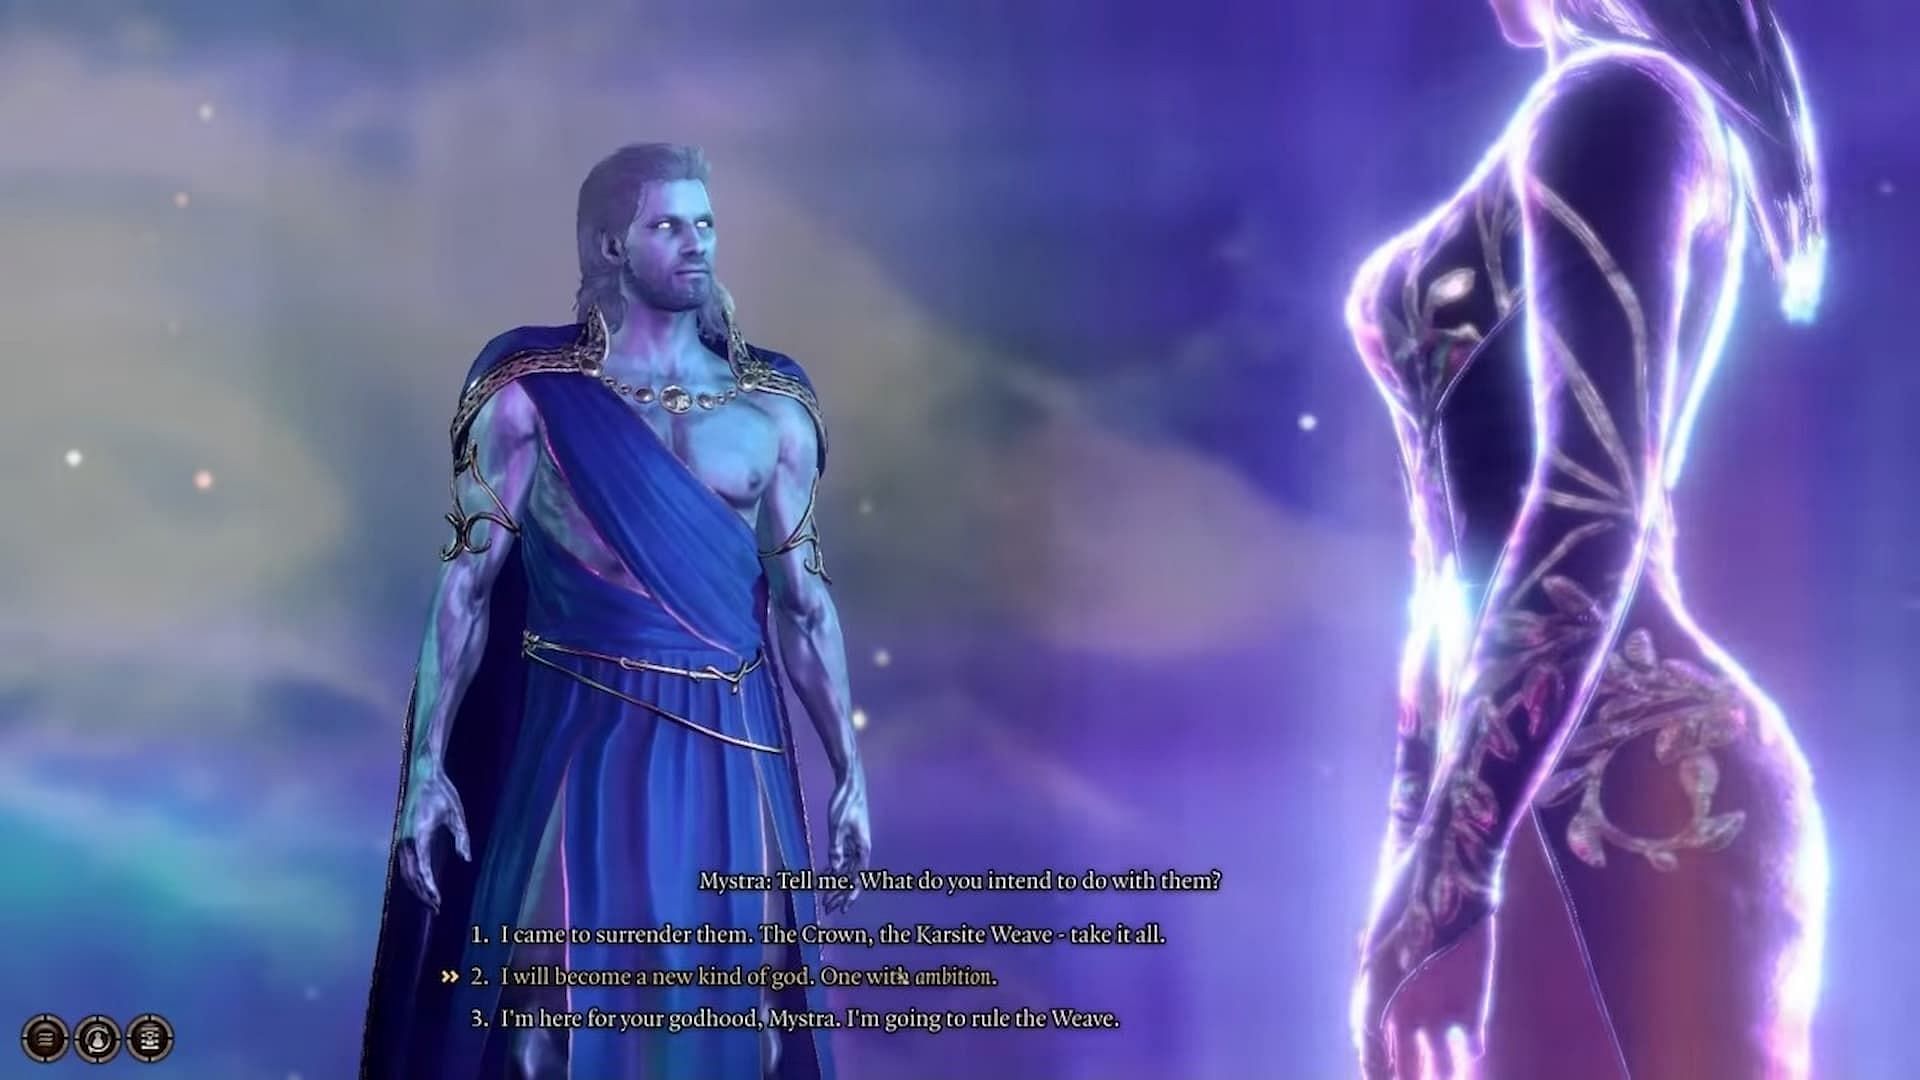 Gale attempts to become a God during a conversation with Mystra (Image via Larian Studios)